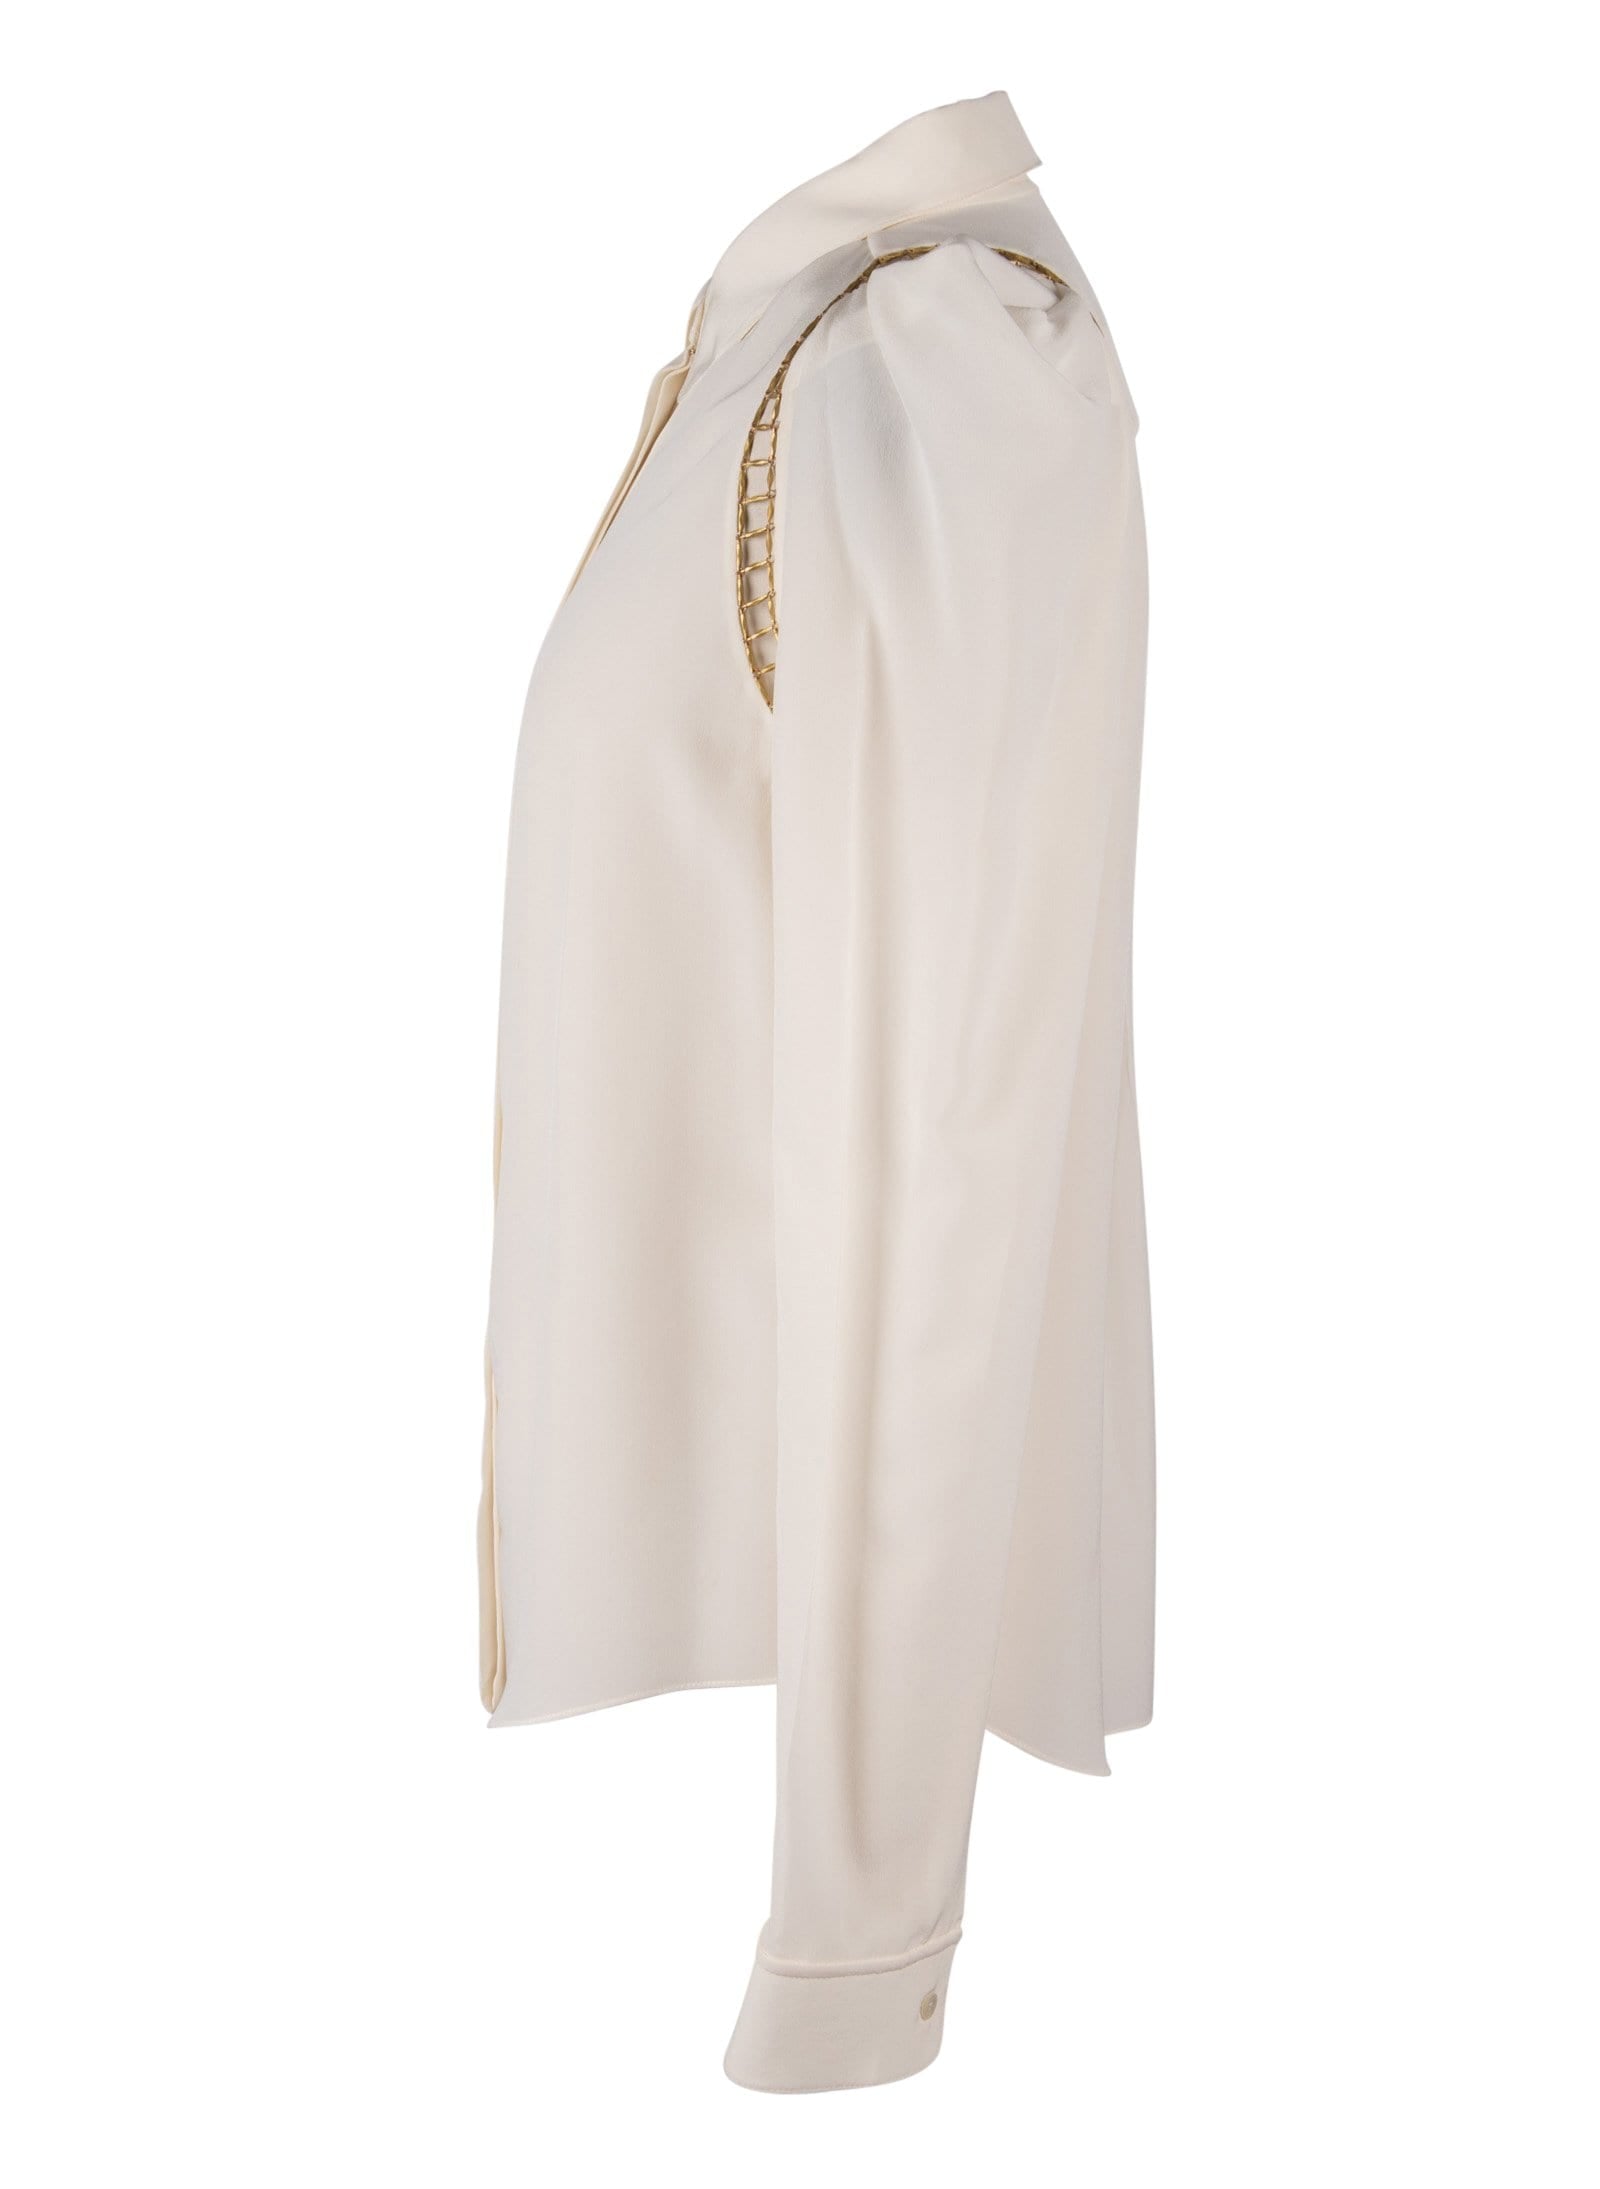 Chloe Top Winter White w/ Open Gold Metal Detail 38 / 6 - mightychic